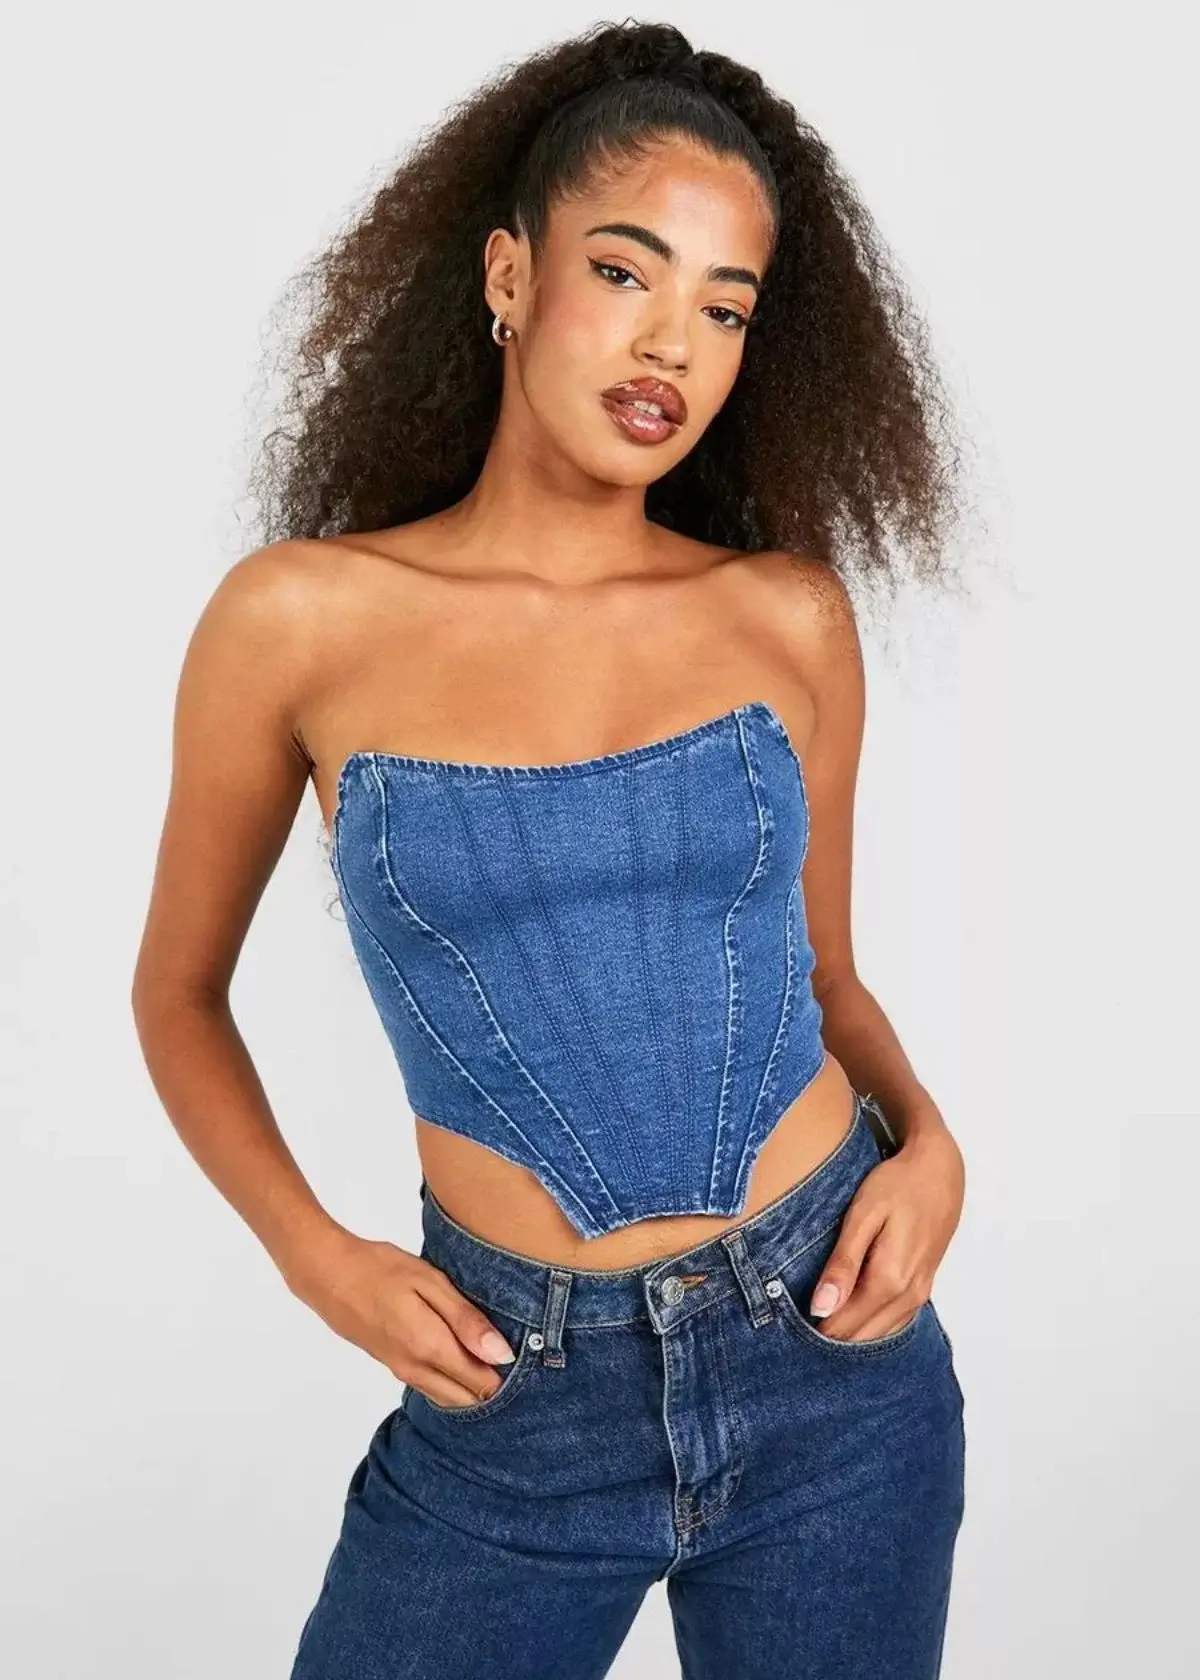 Are denim corsets suitable for everyday wear?